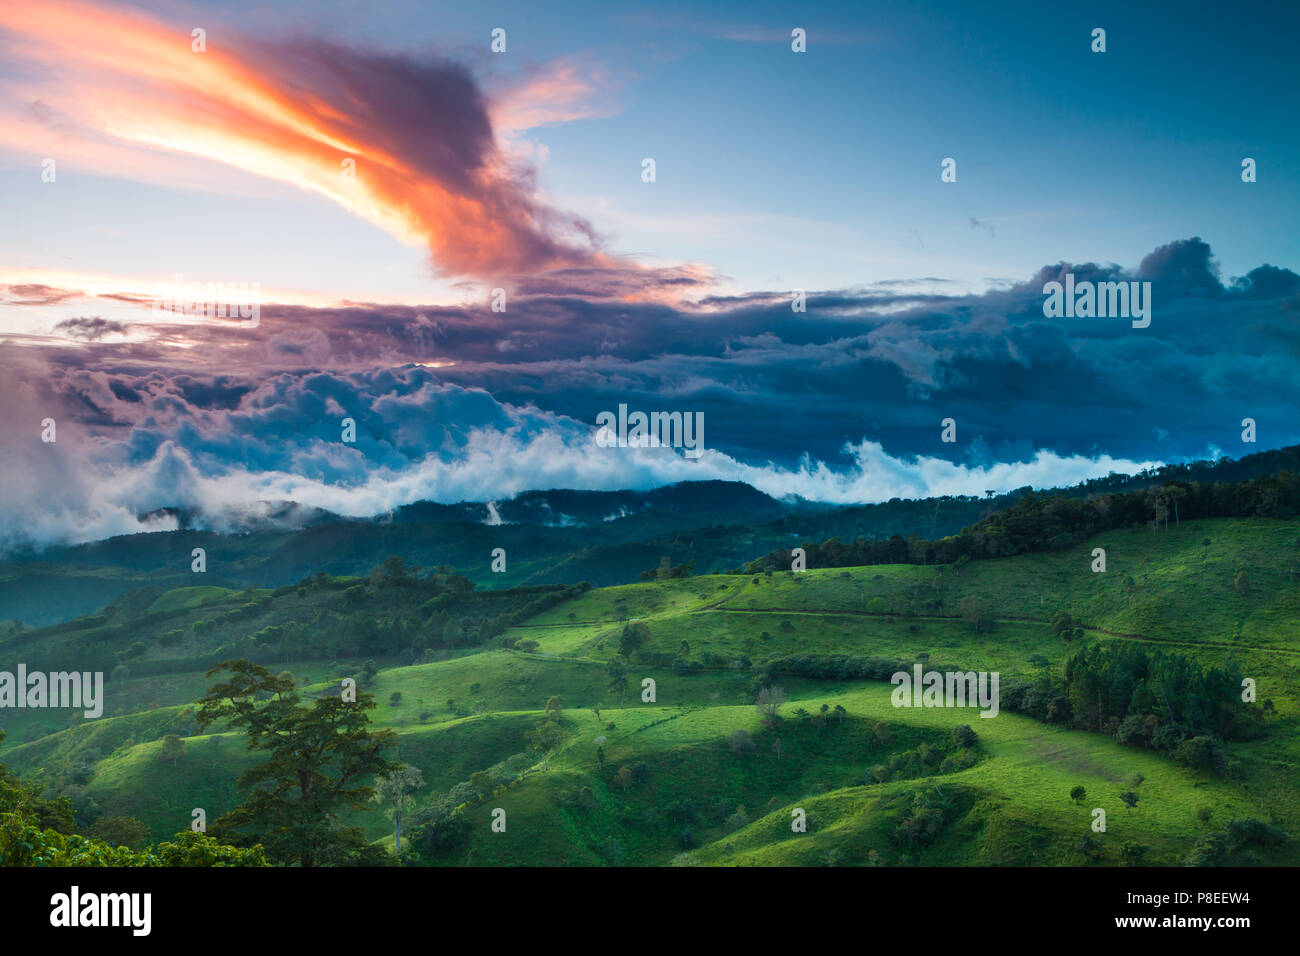 Amazing colorful sunset in the western highlands near the town Volcan, Chiriqui province, Republic of Panama, Central America. Stock Photo